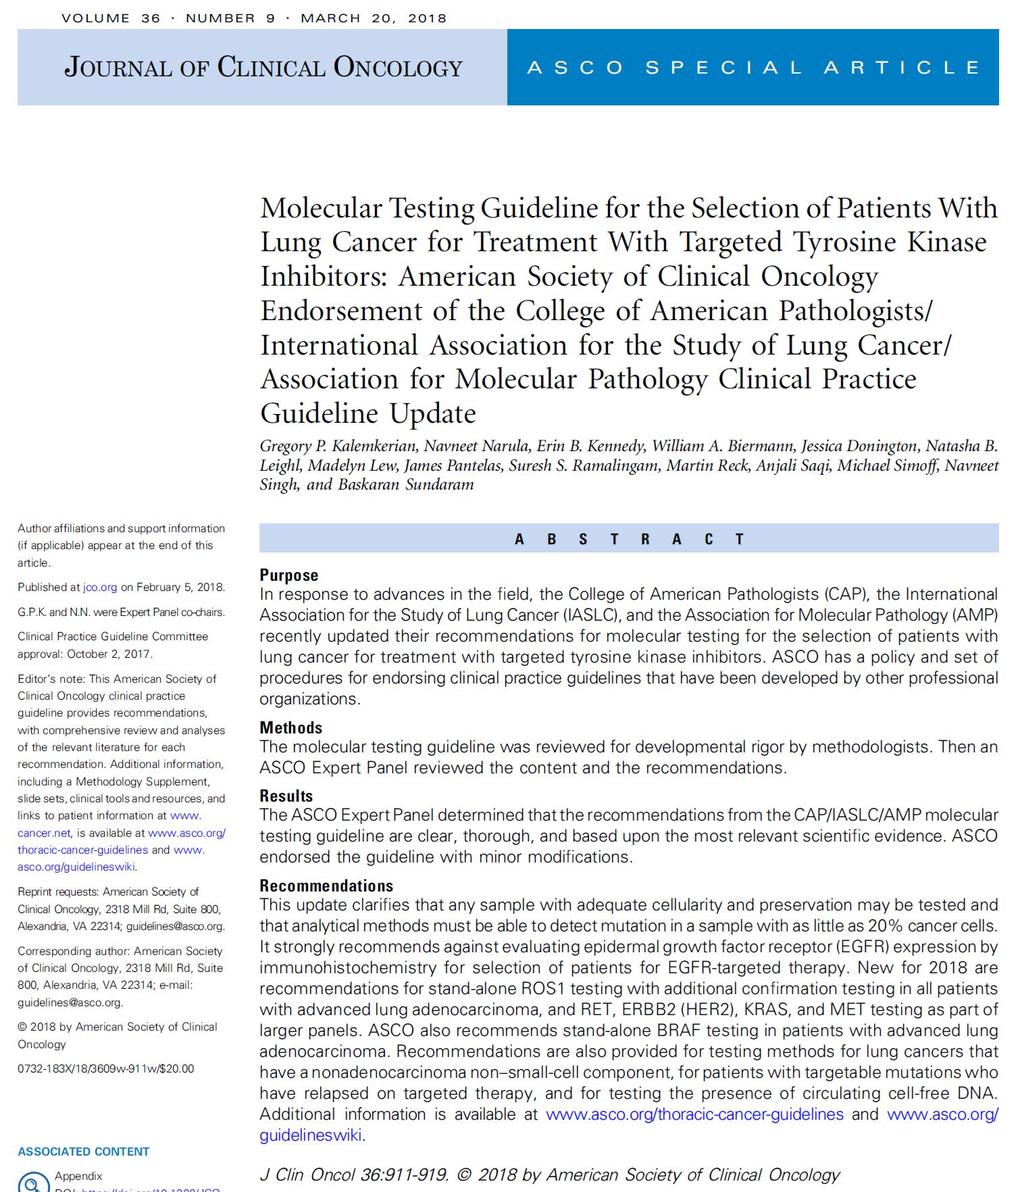 Guideline from the College of American Pathologists, the International